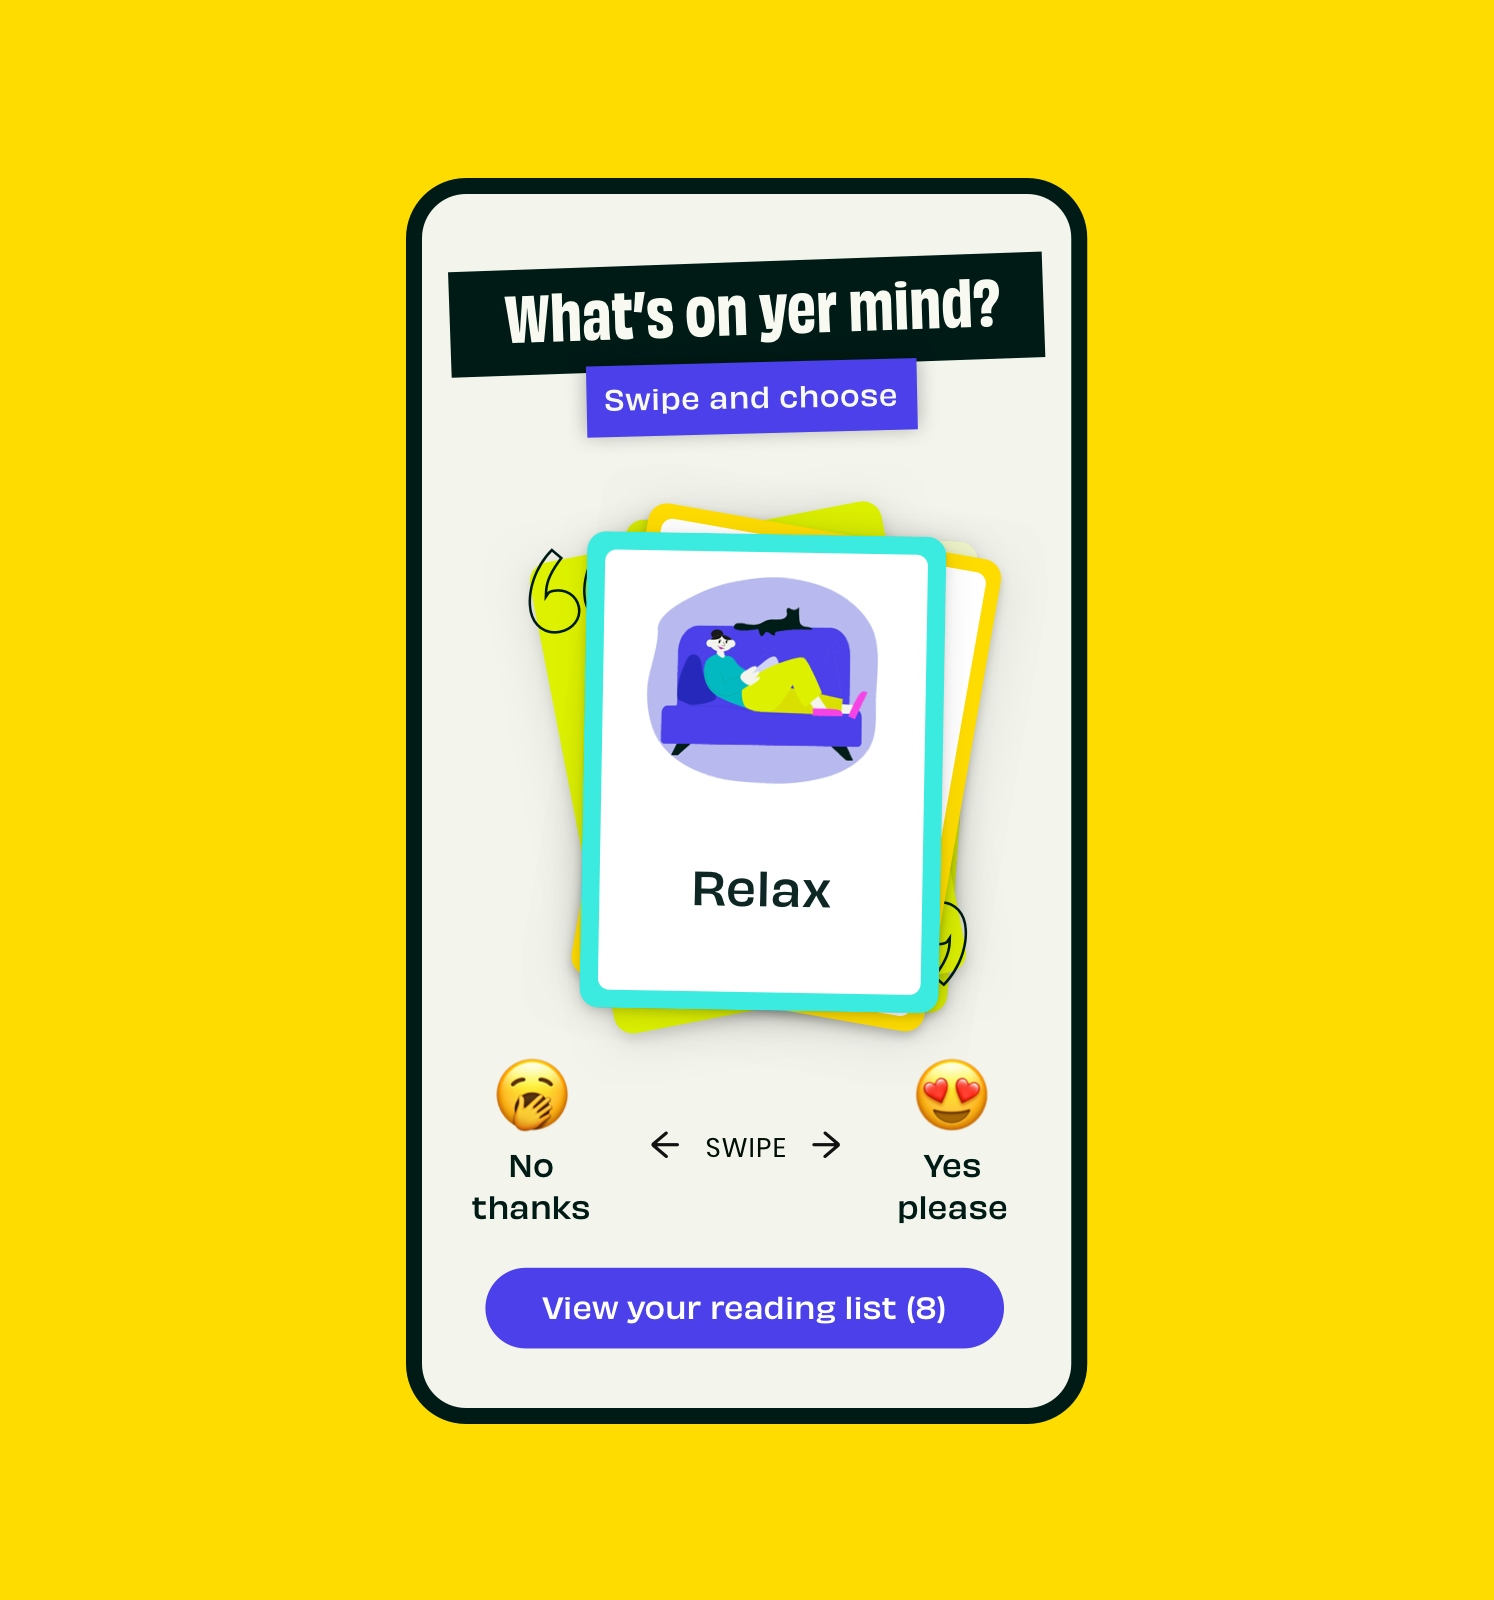 A mobile phone depicts a screenshot of the Mind yer Time page “What’s on yer mind?” on a yellow background